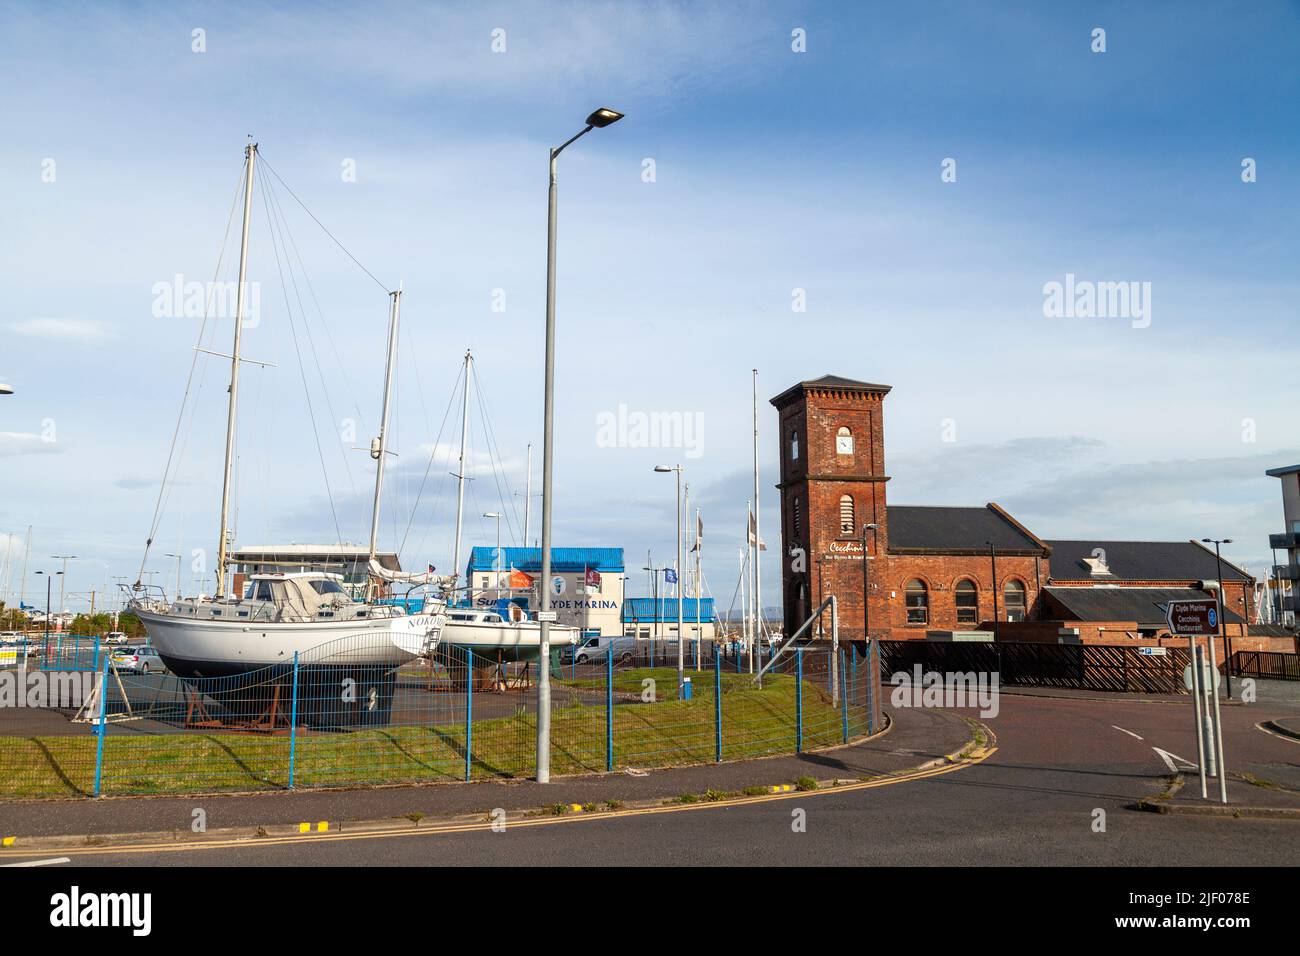 Boats out of the water at Ardrossan Marina Stock Photo